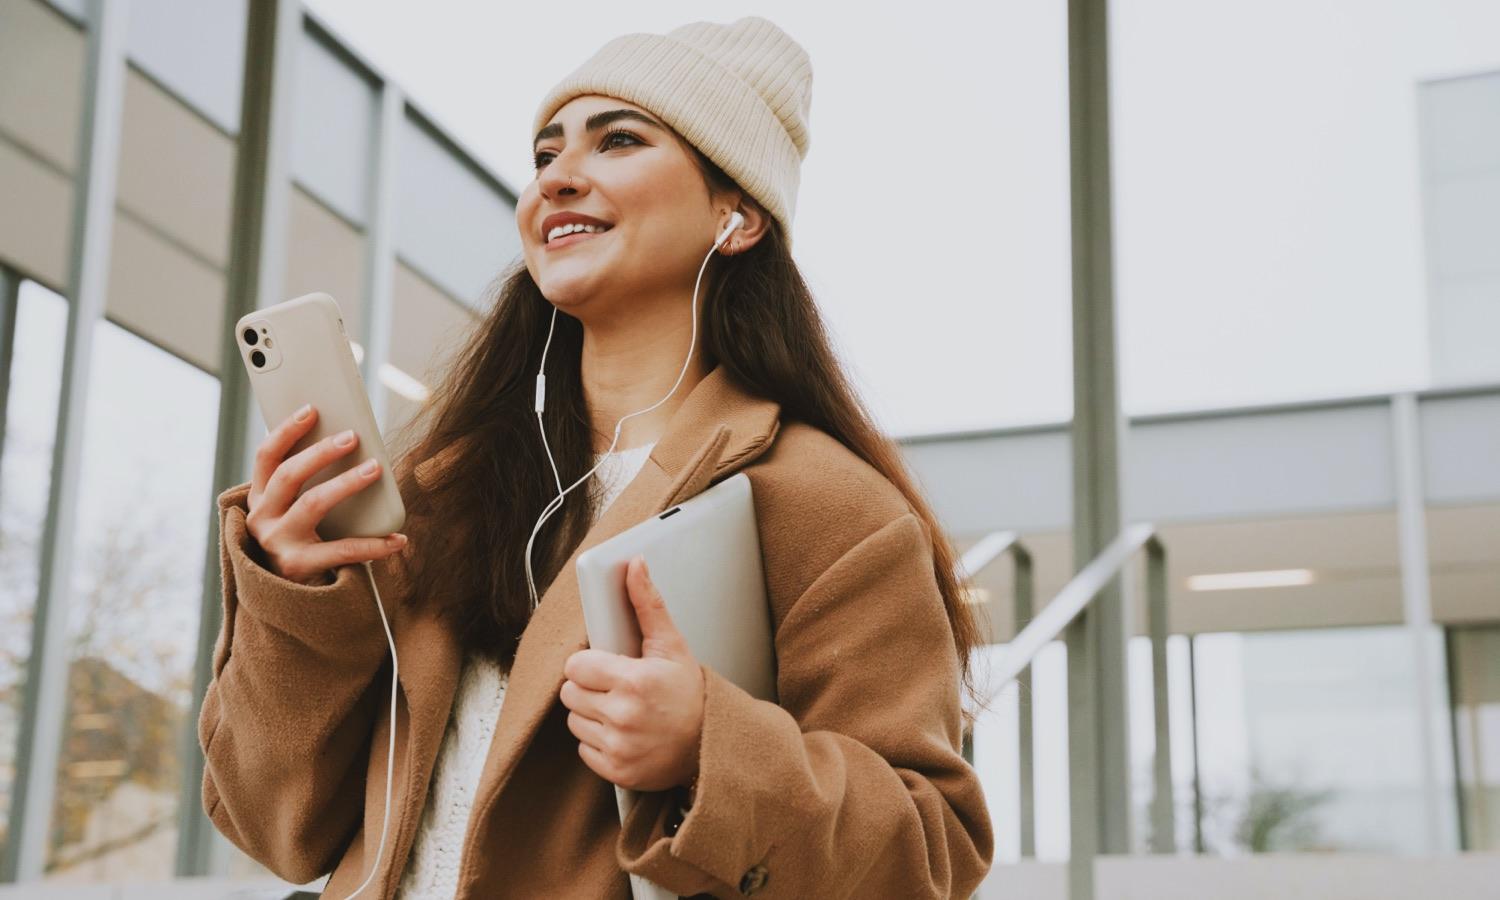 woman walking wearing headphones plugged in to a phone in one hand